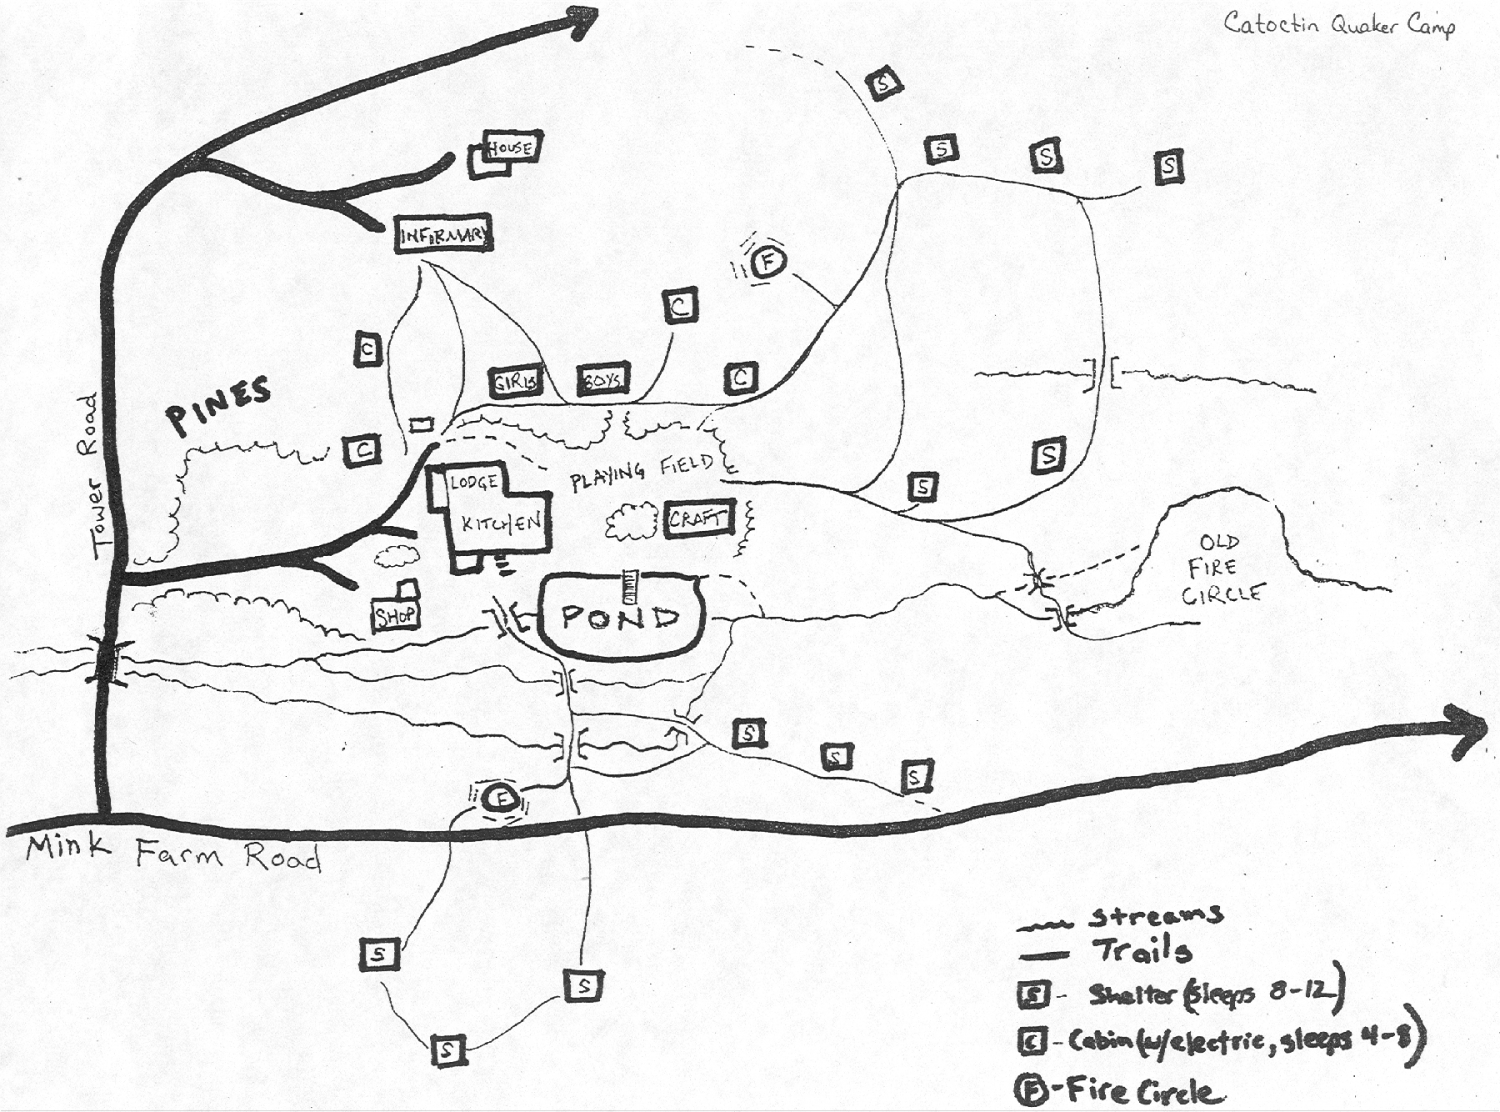 Catoctin hand drawn map of the camp